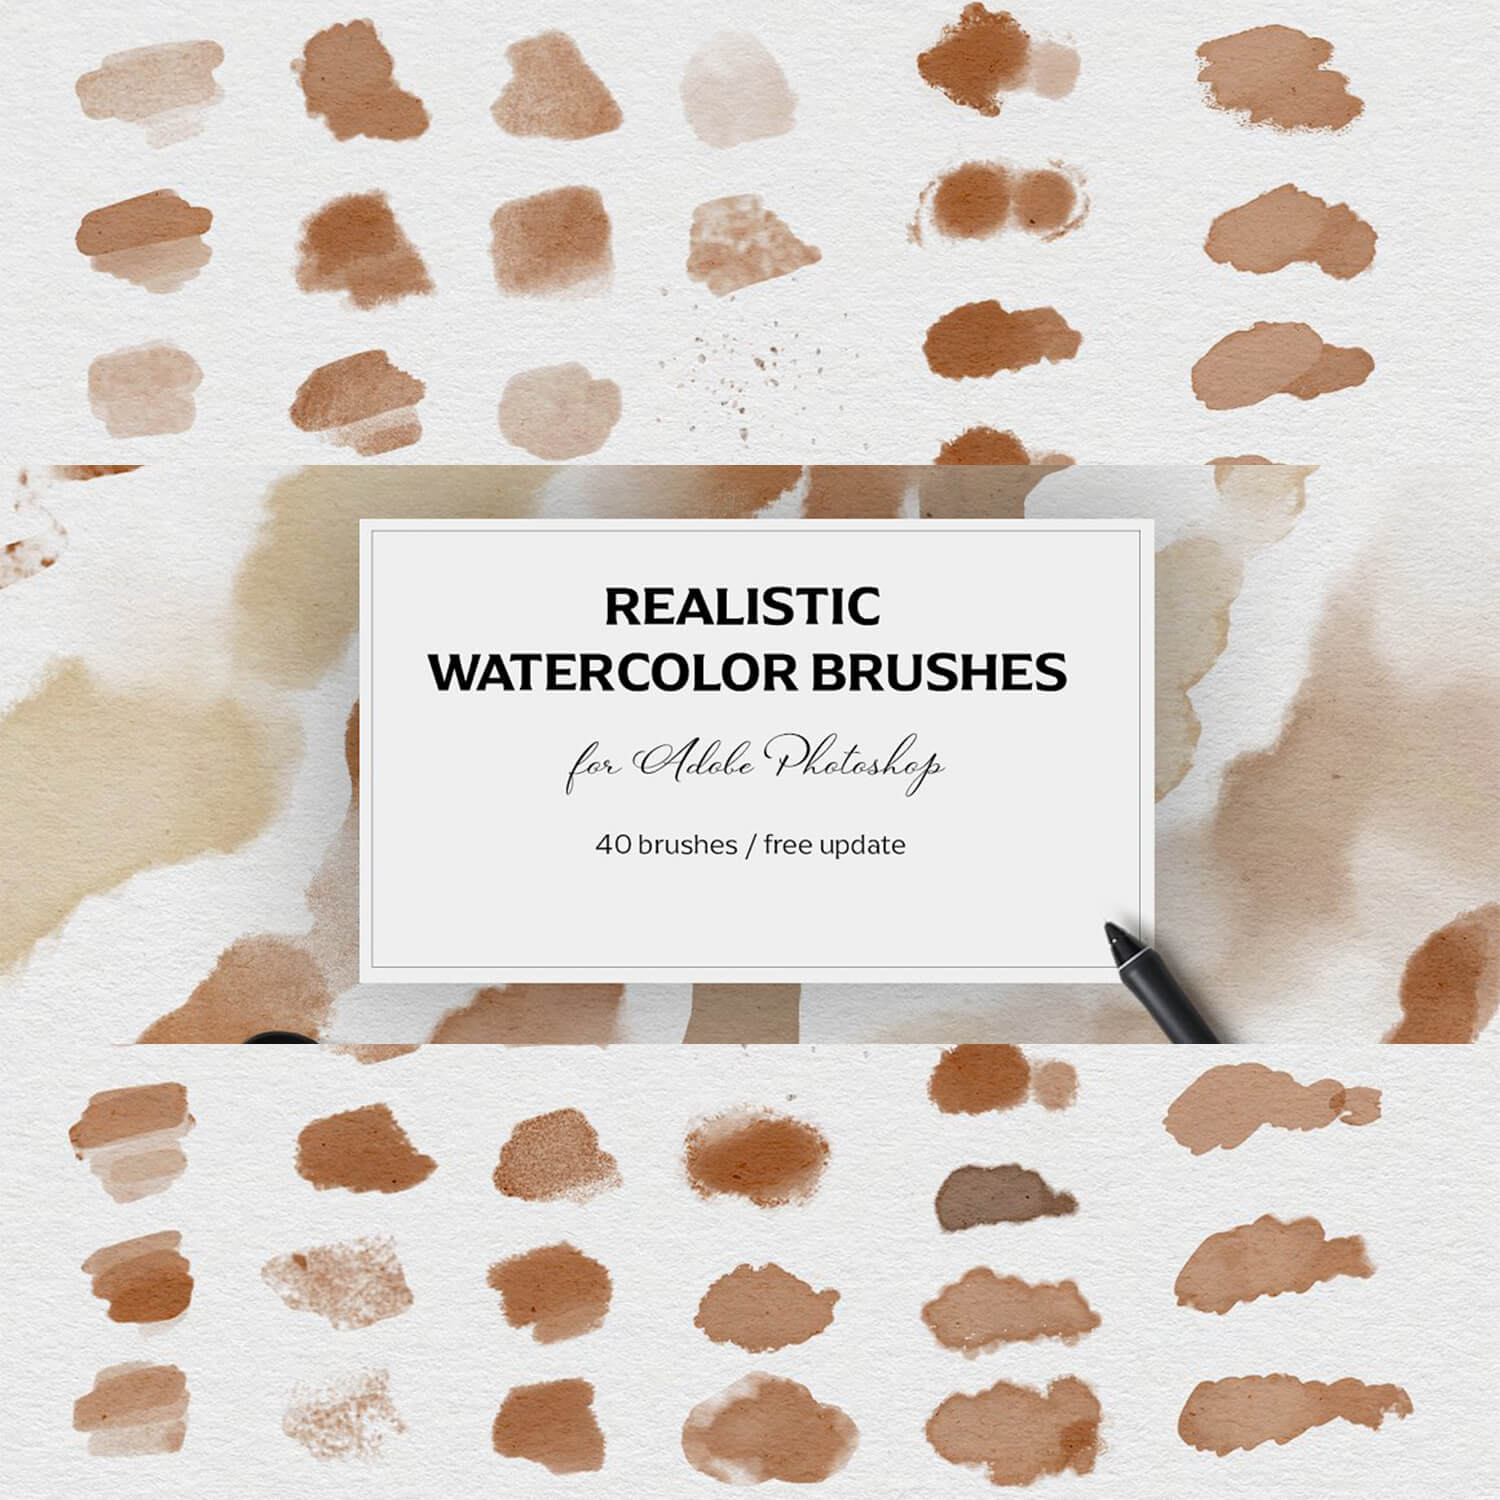 Realistic Watercolor Brushes, 40 Brushes, Free Update.